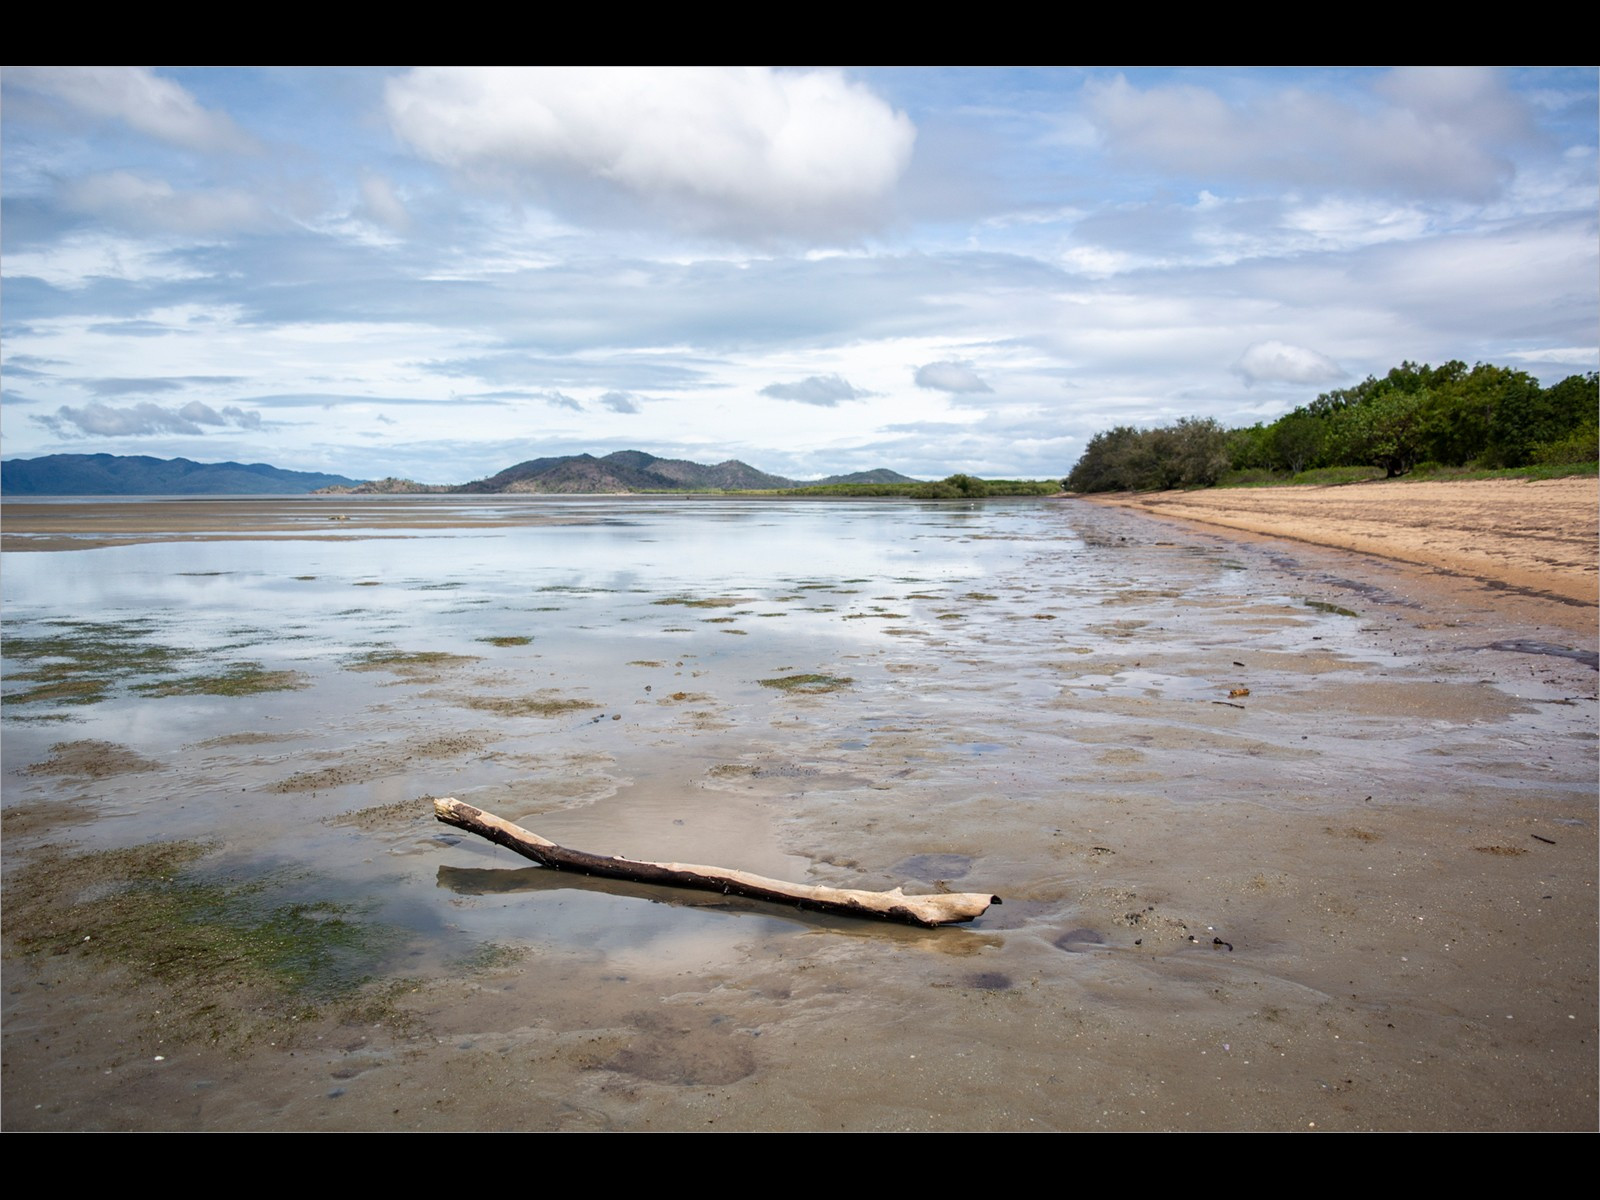 Driftwood on the beach in Townsville Queensland